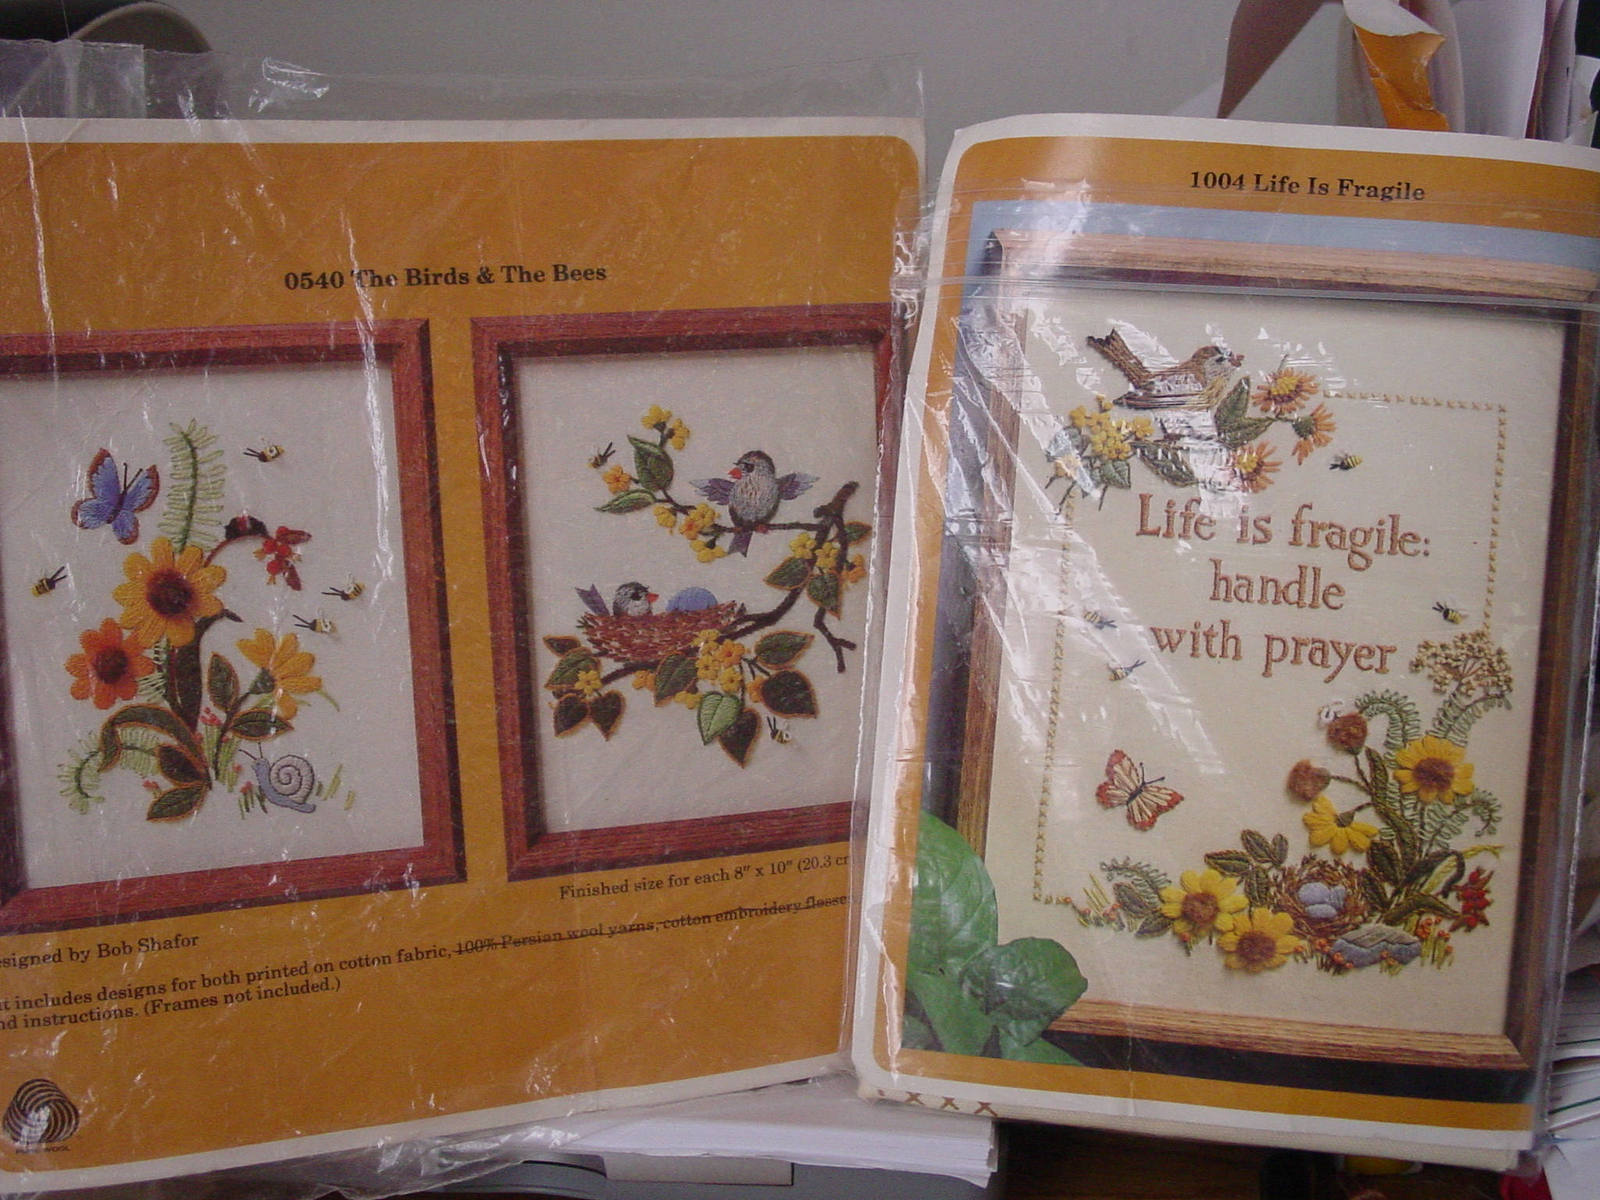 Two Crewel Kits, Missing Yarn, Threads - Printed Canvases with Instructions - $2.49